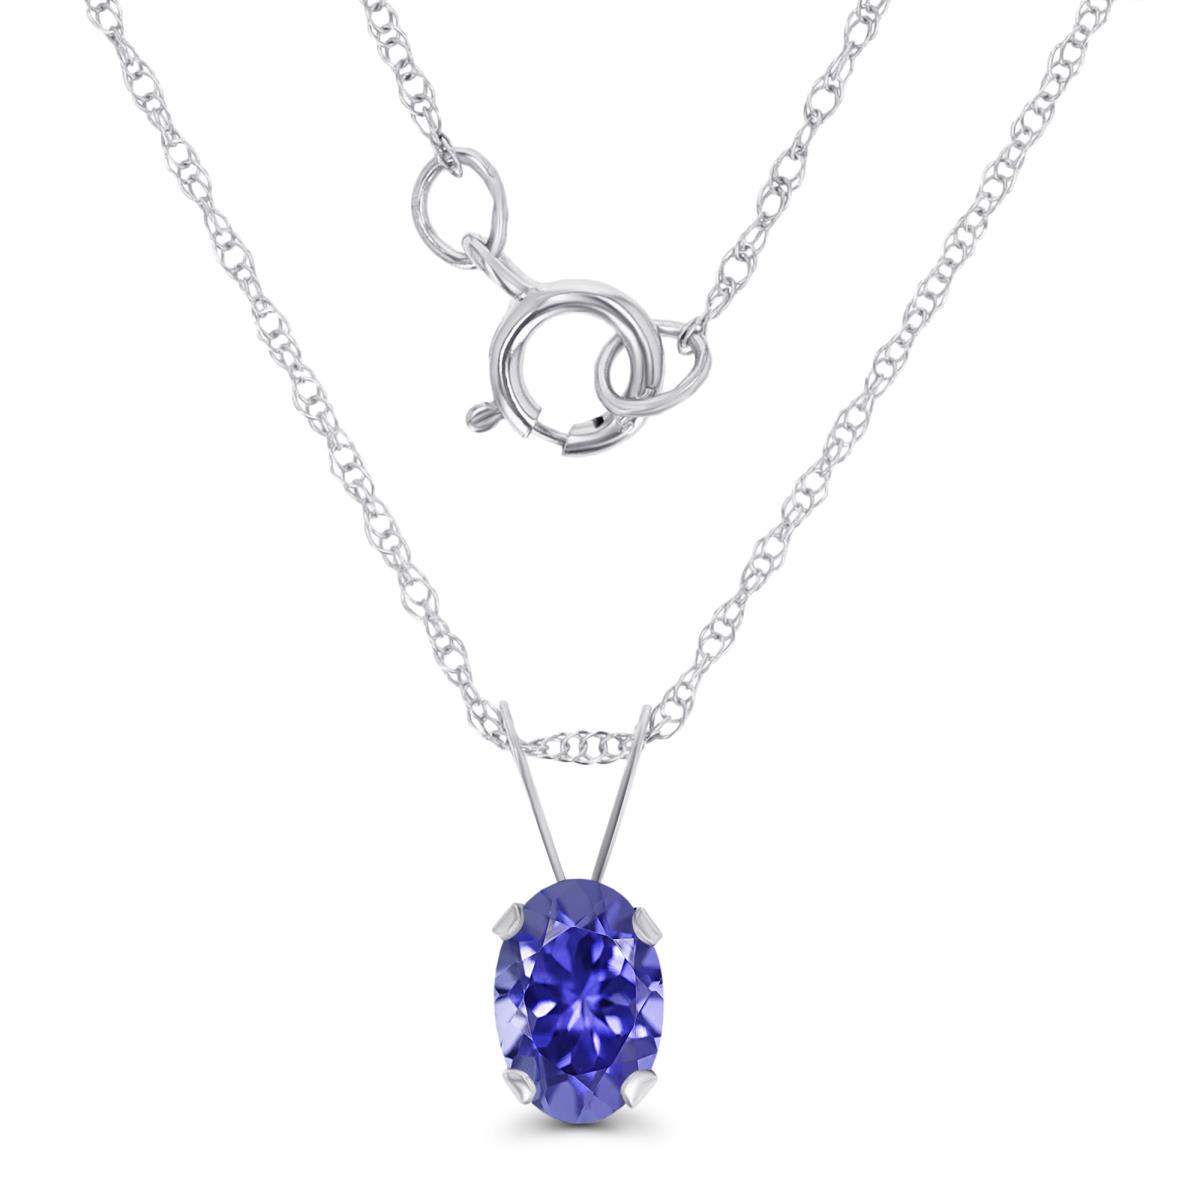 14K White Gold 6x4mm Oval Tanzanite 18" Rope Chain Necklace